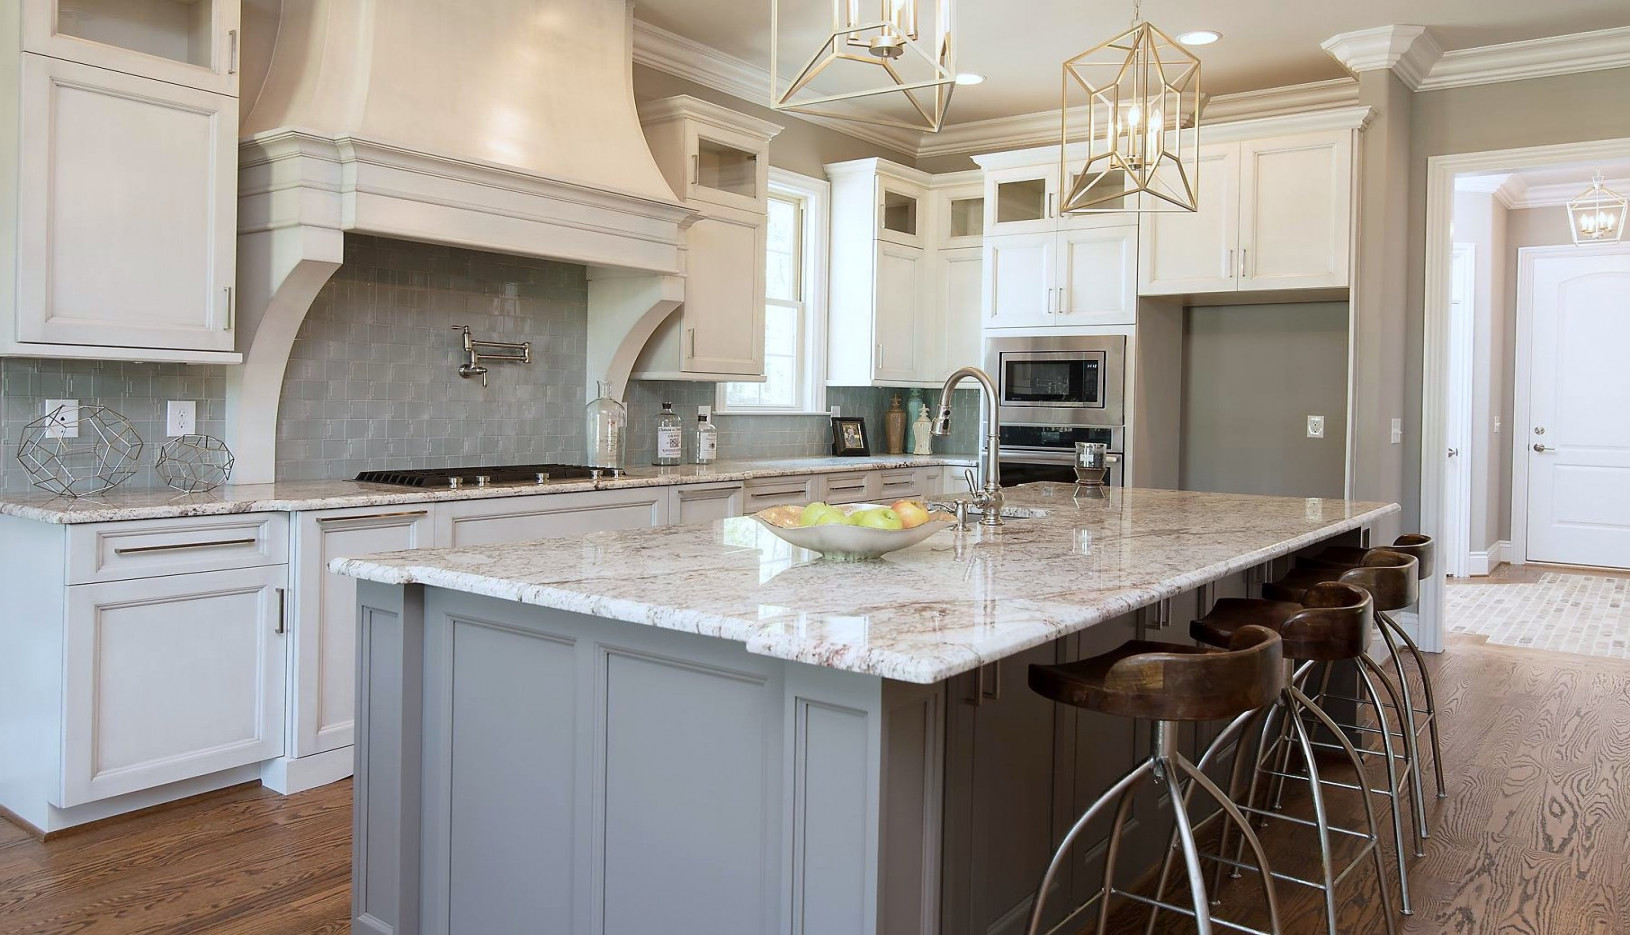 Planning for a Large Kitchen Island - Marble Granite World